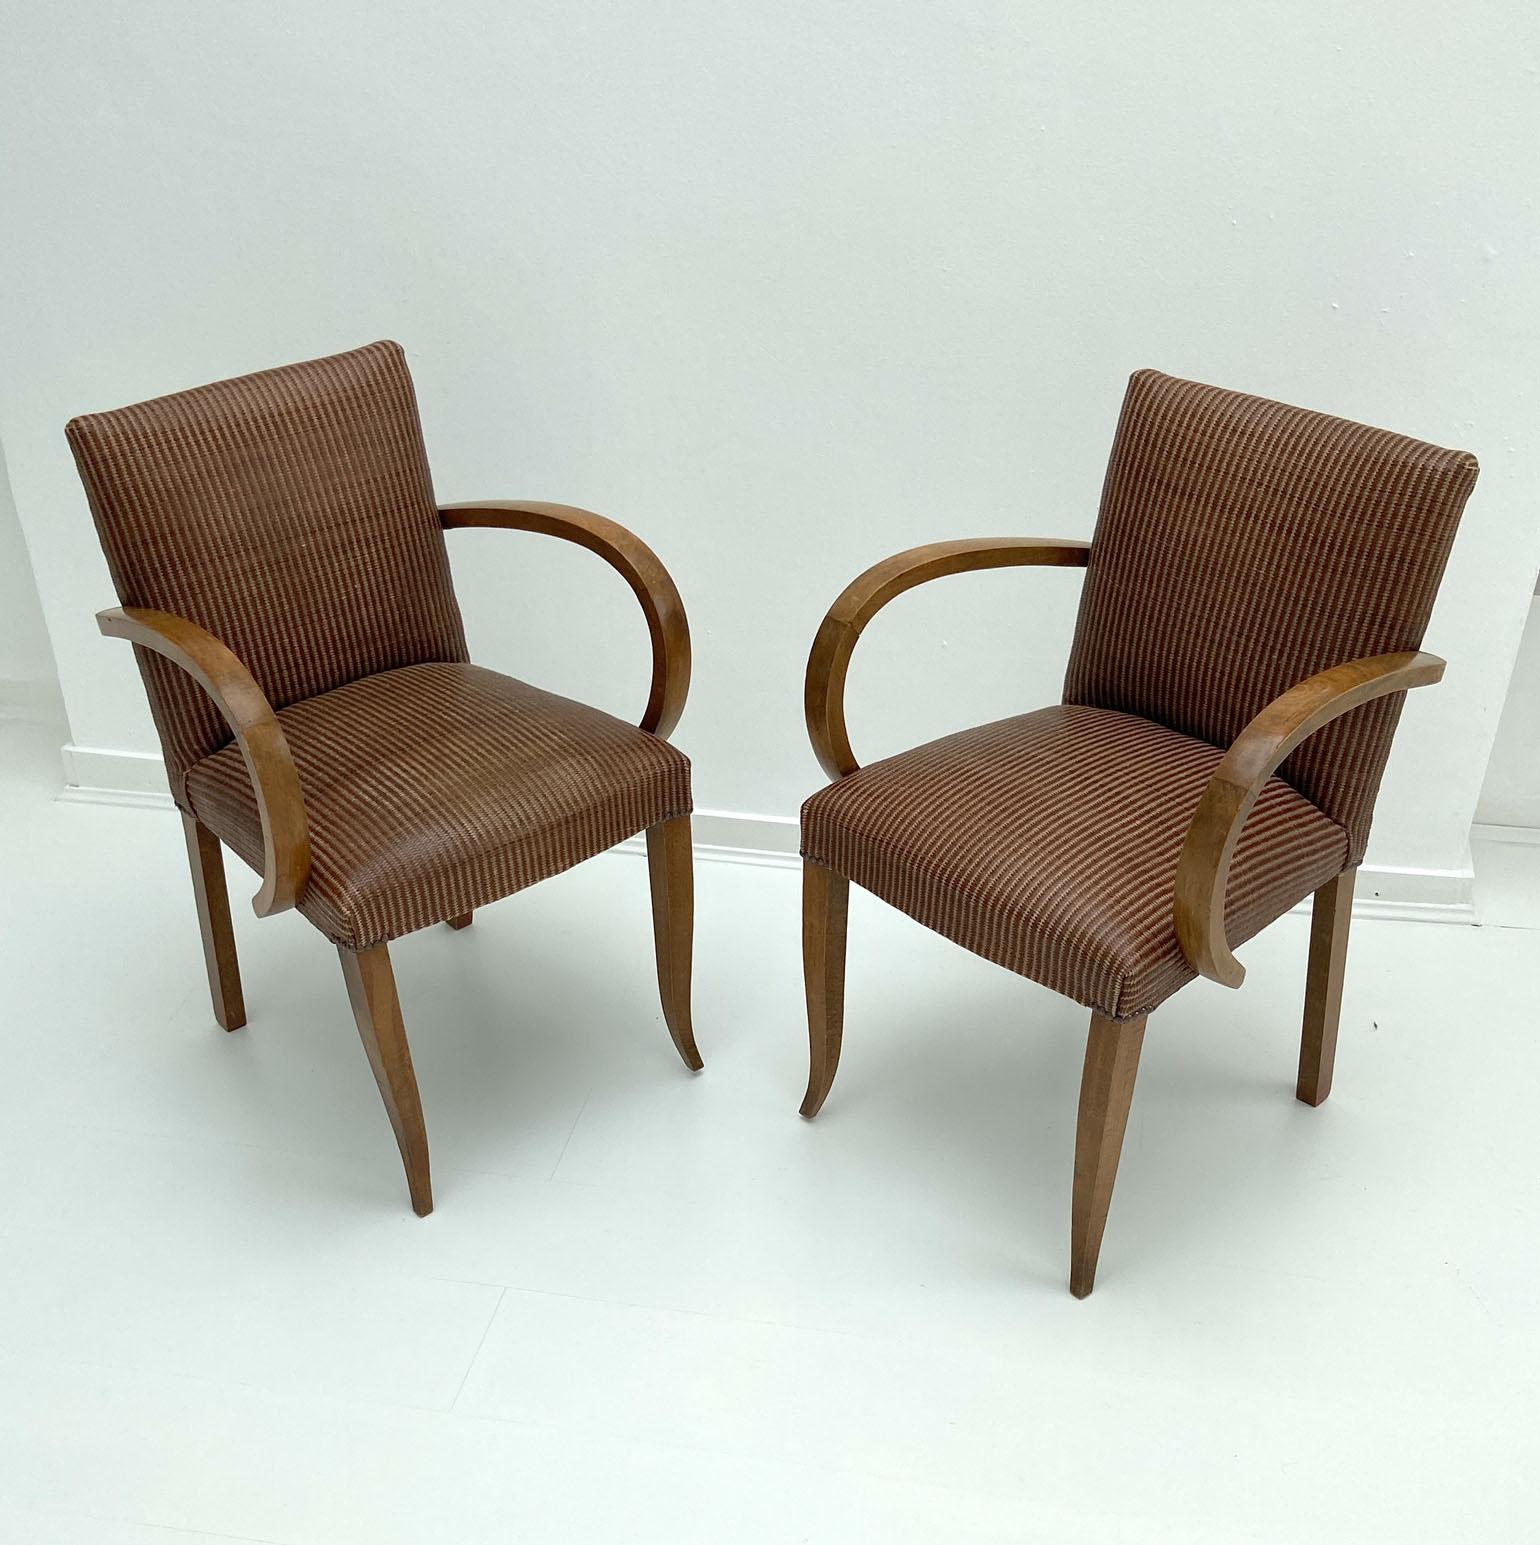 Pair of Modernist Bridge Chairs or Armchairs, French, 1930s In Excellent Condition For Sale In London, GB